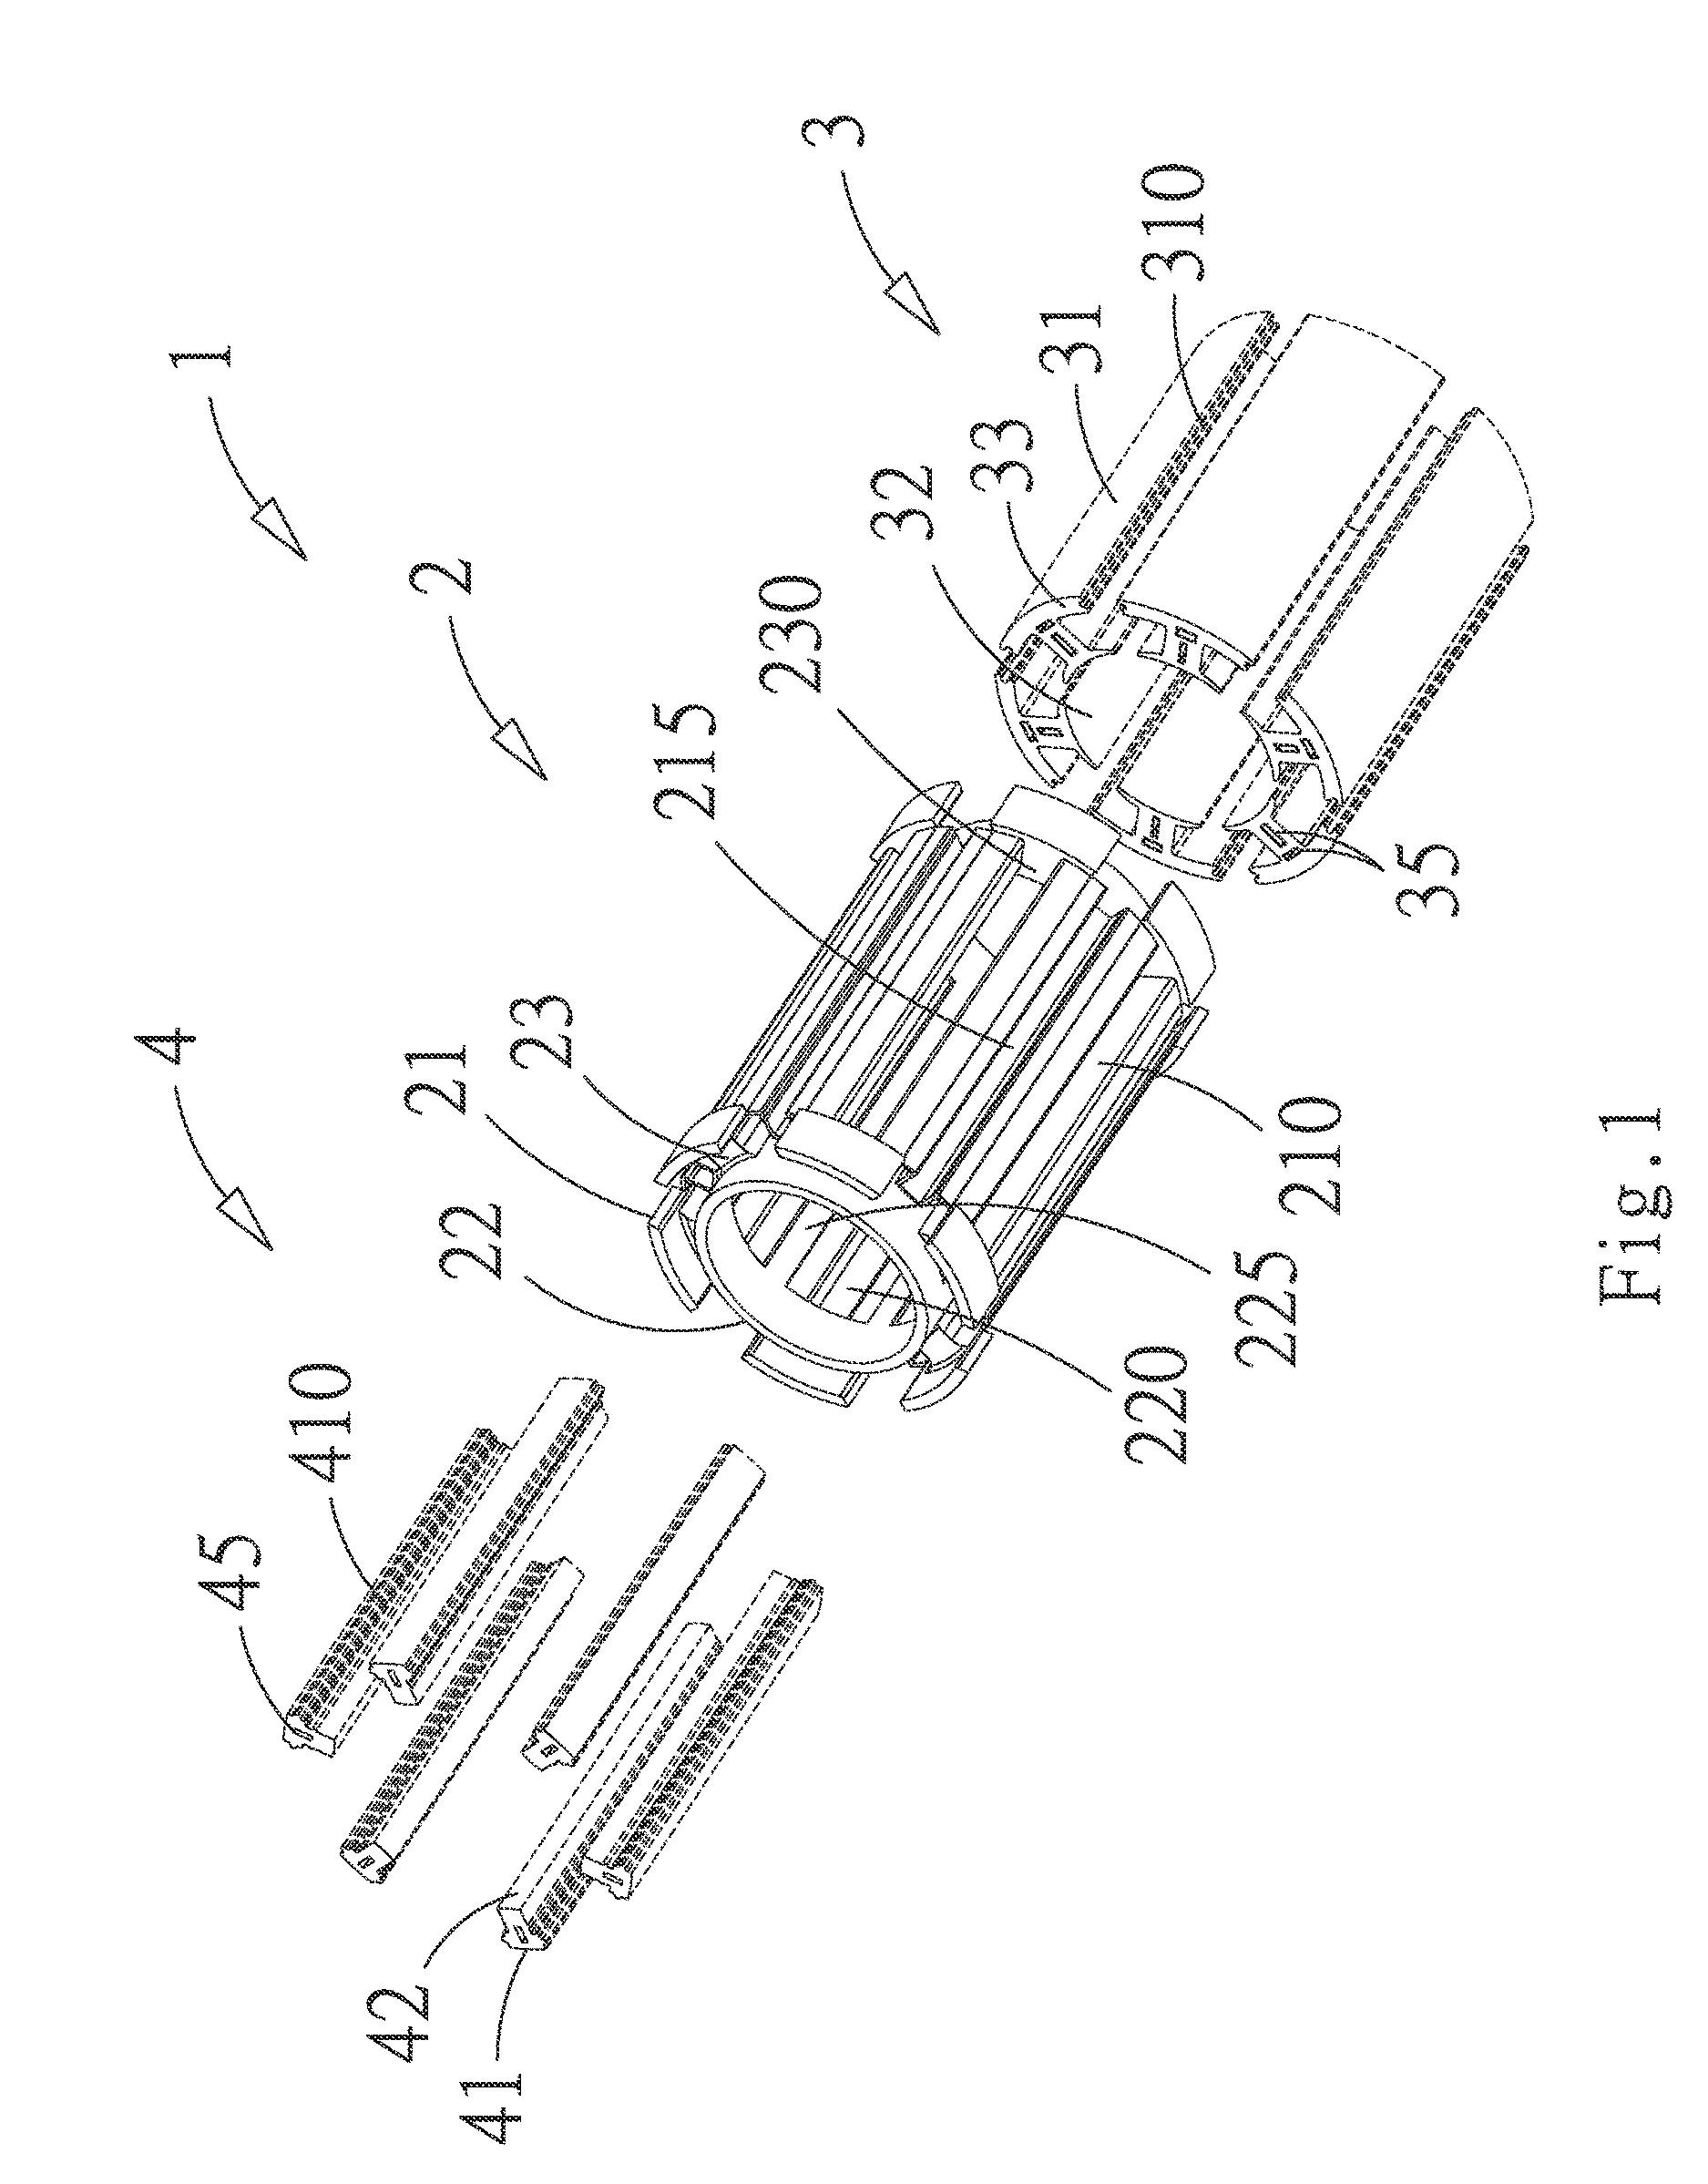 Motor stator device with simple coil-winding structure